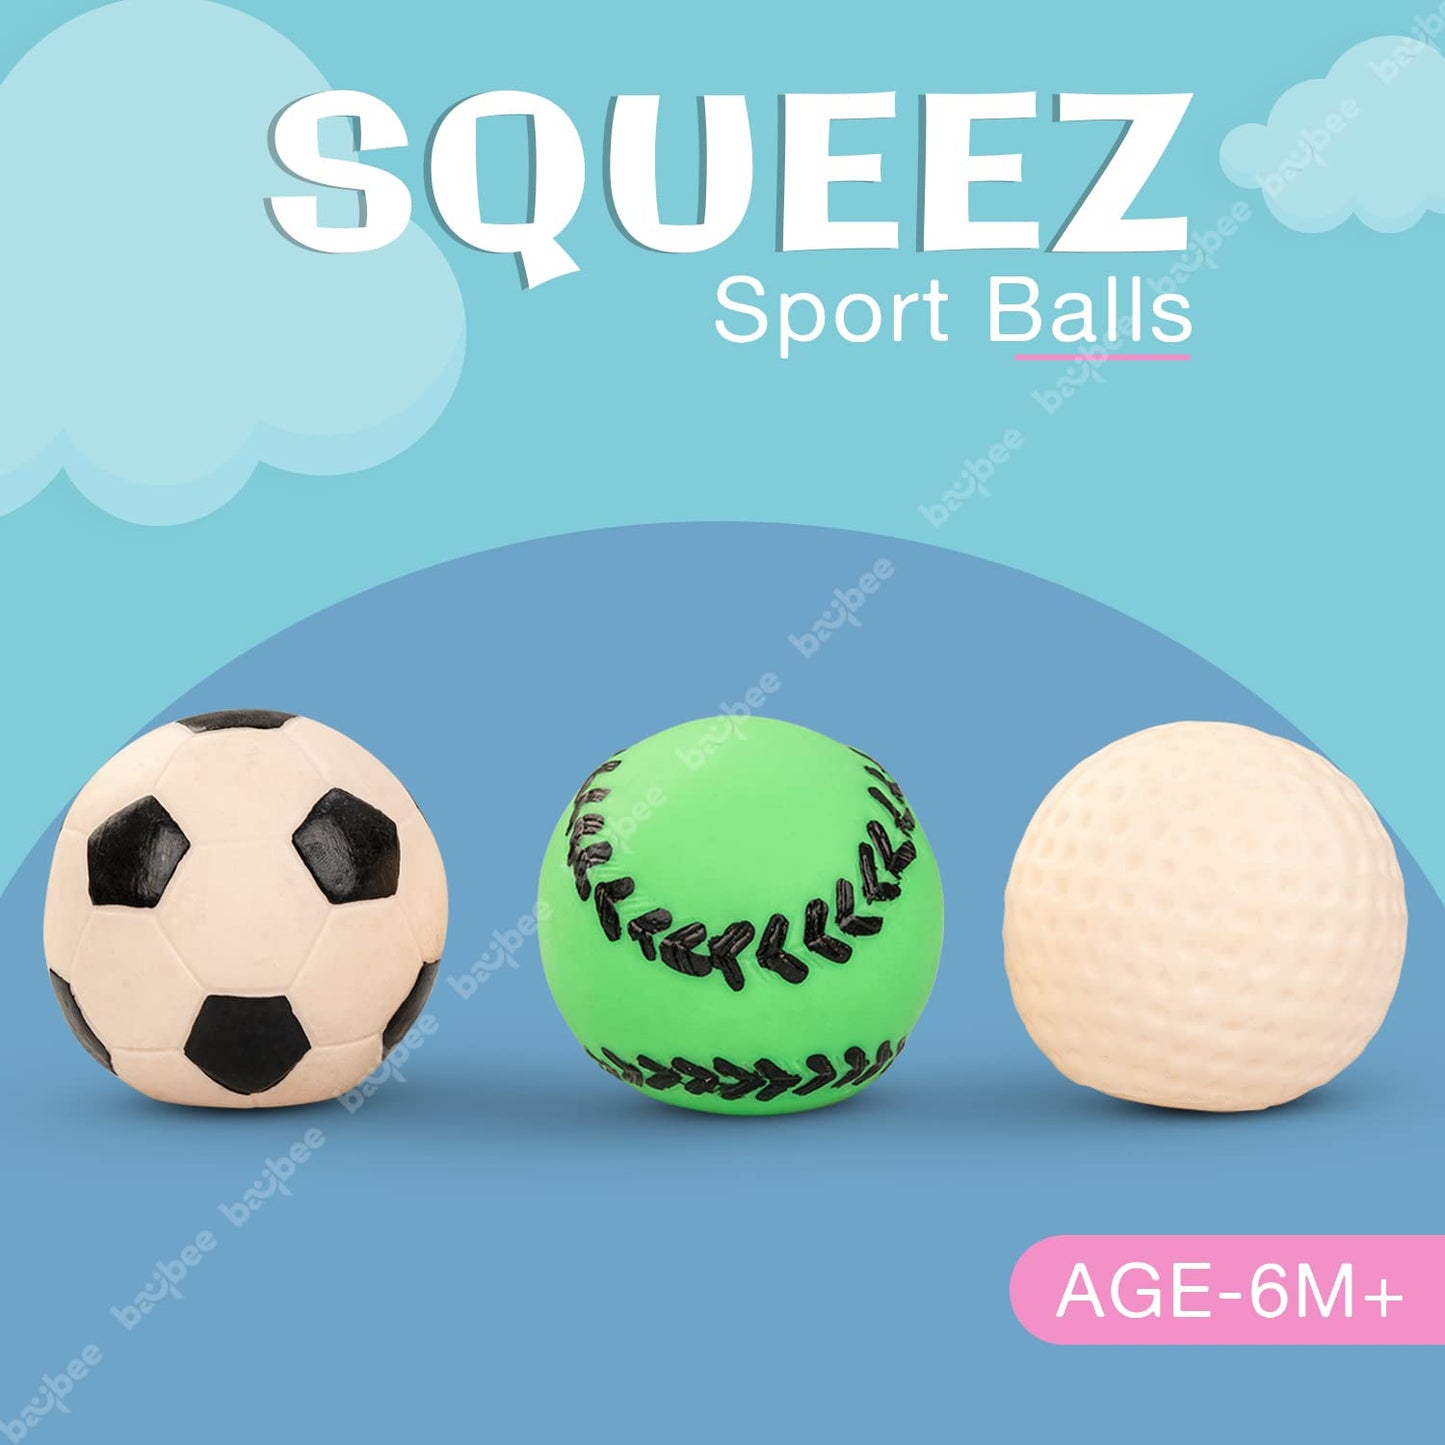 BAYBEE Mini Sports Squeeze Soft Rubber  Balls for Toddlers & Kids